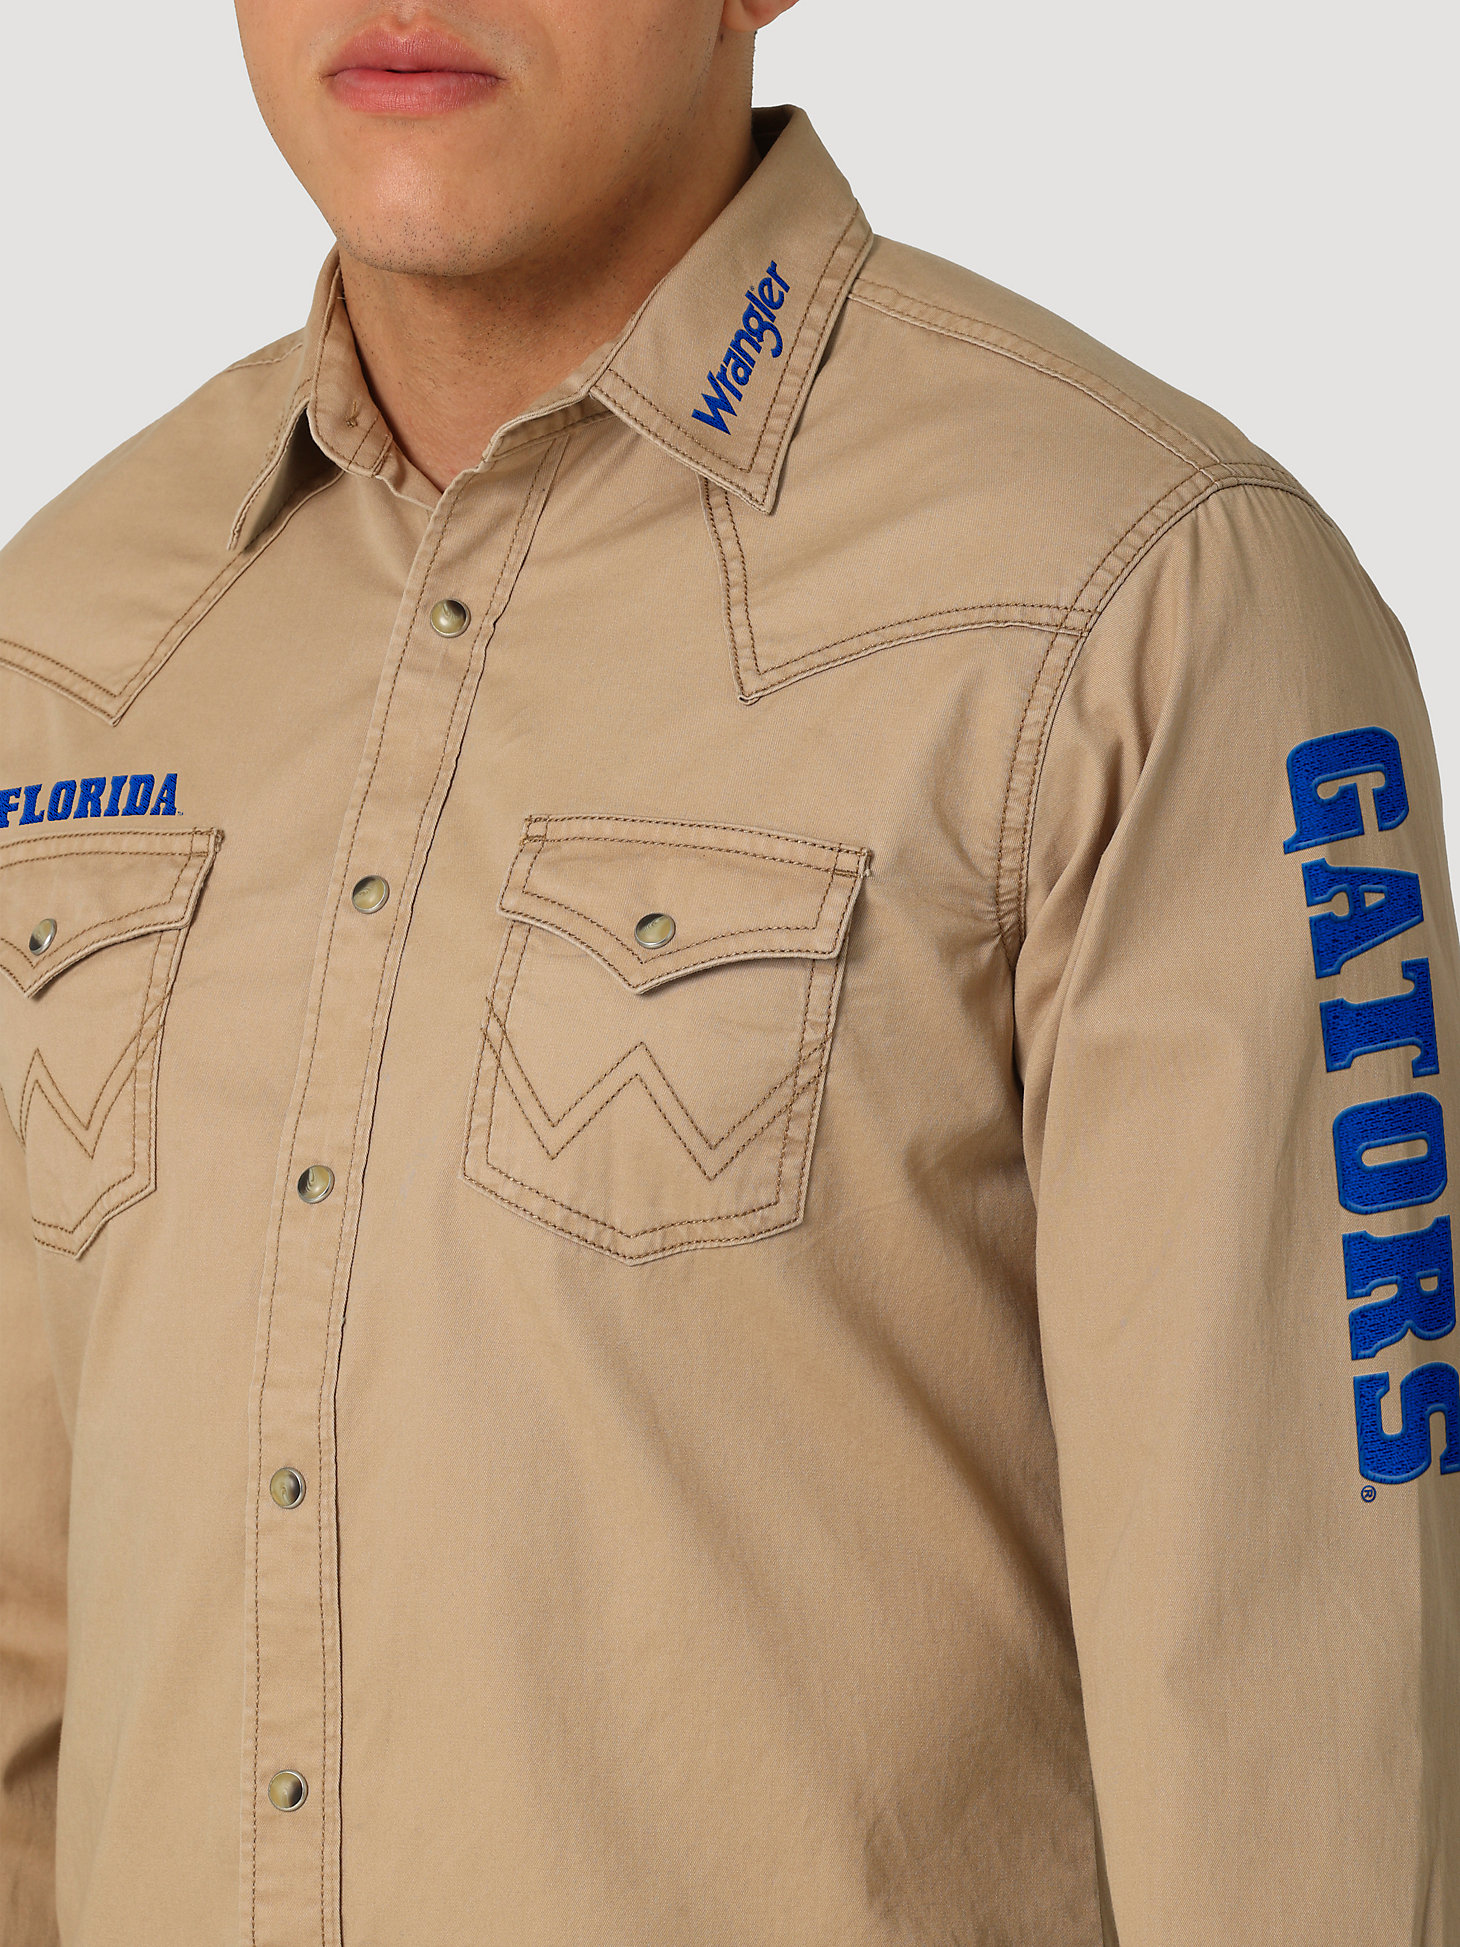 Wrangler Collegiate Embroidered Twill Western Snap Shirt in University of Florida alternative view 2